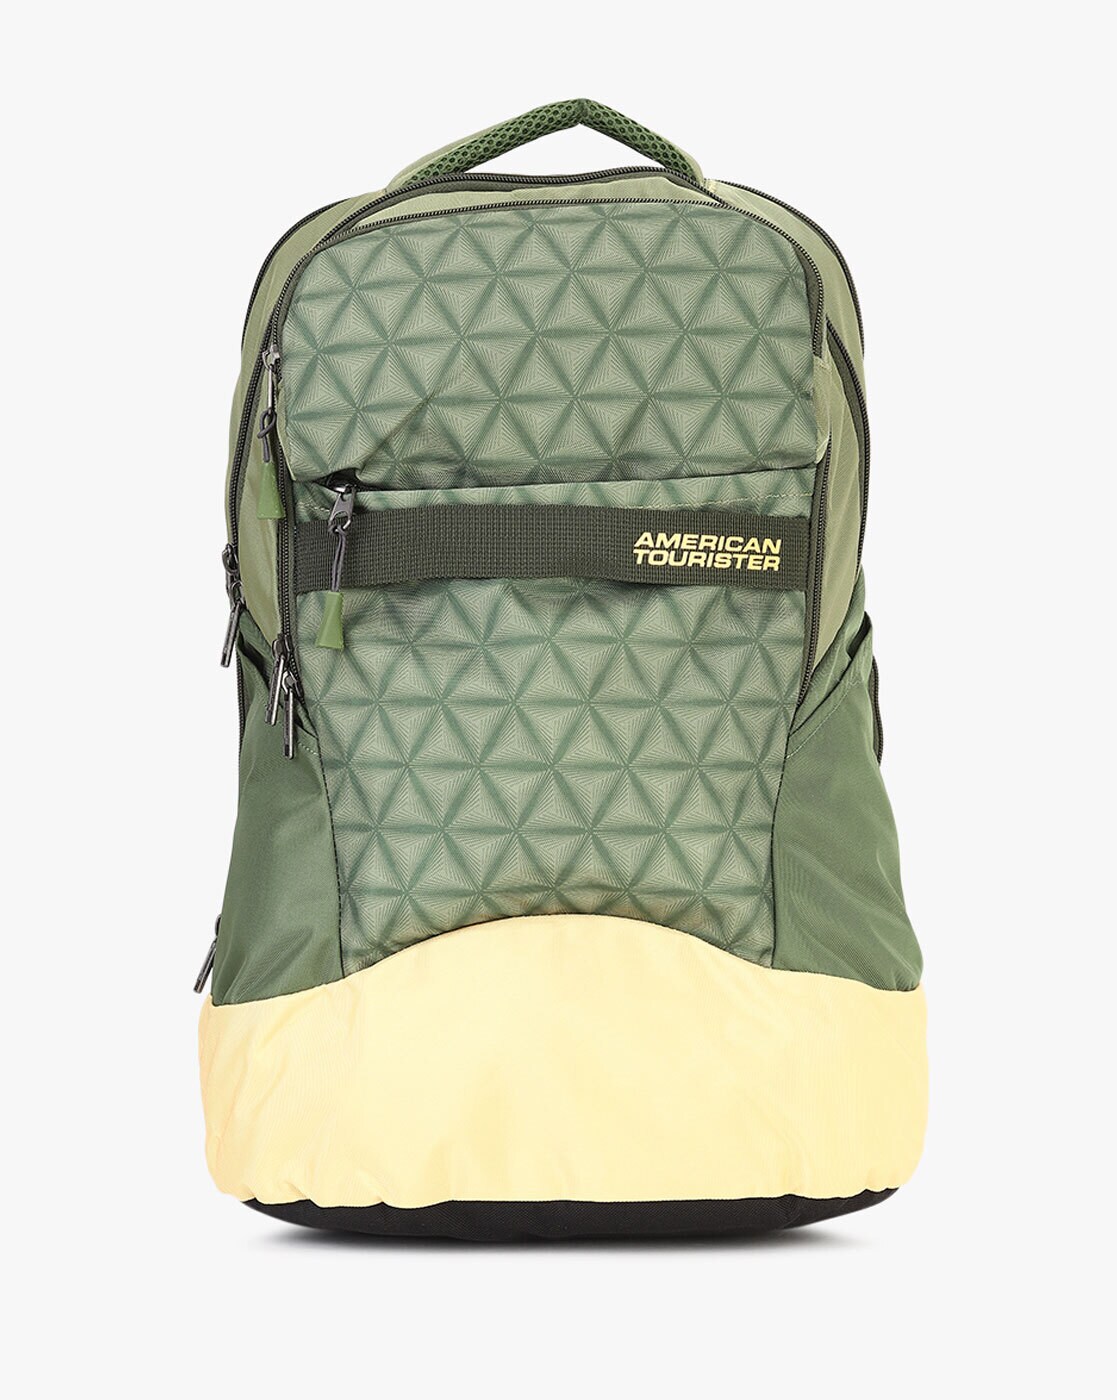 American Tourister And Wildcraft Bags Are Ideal Travel Partner For All  Journeys